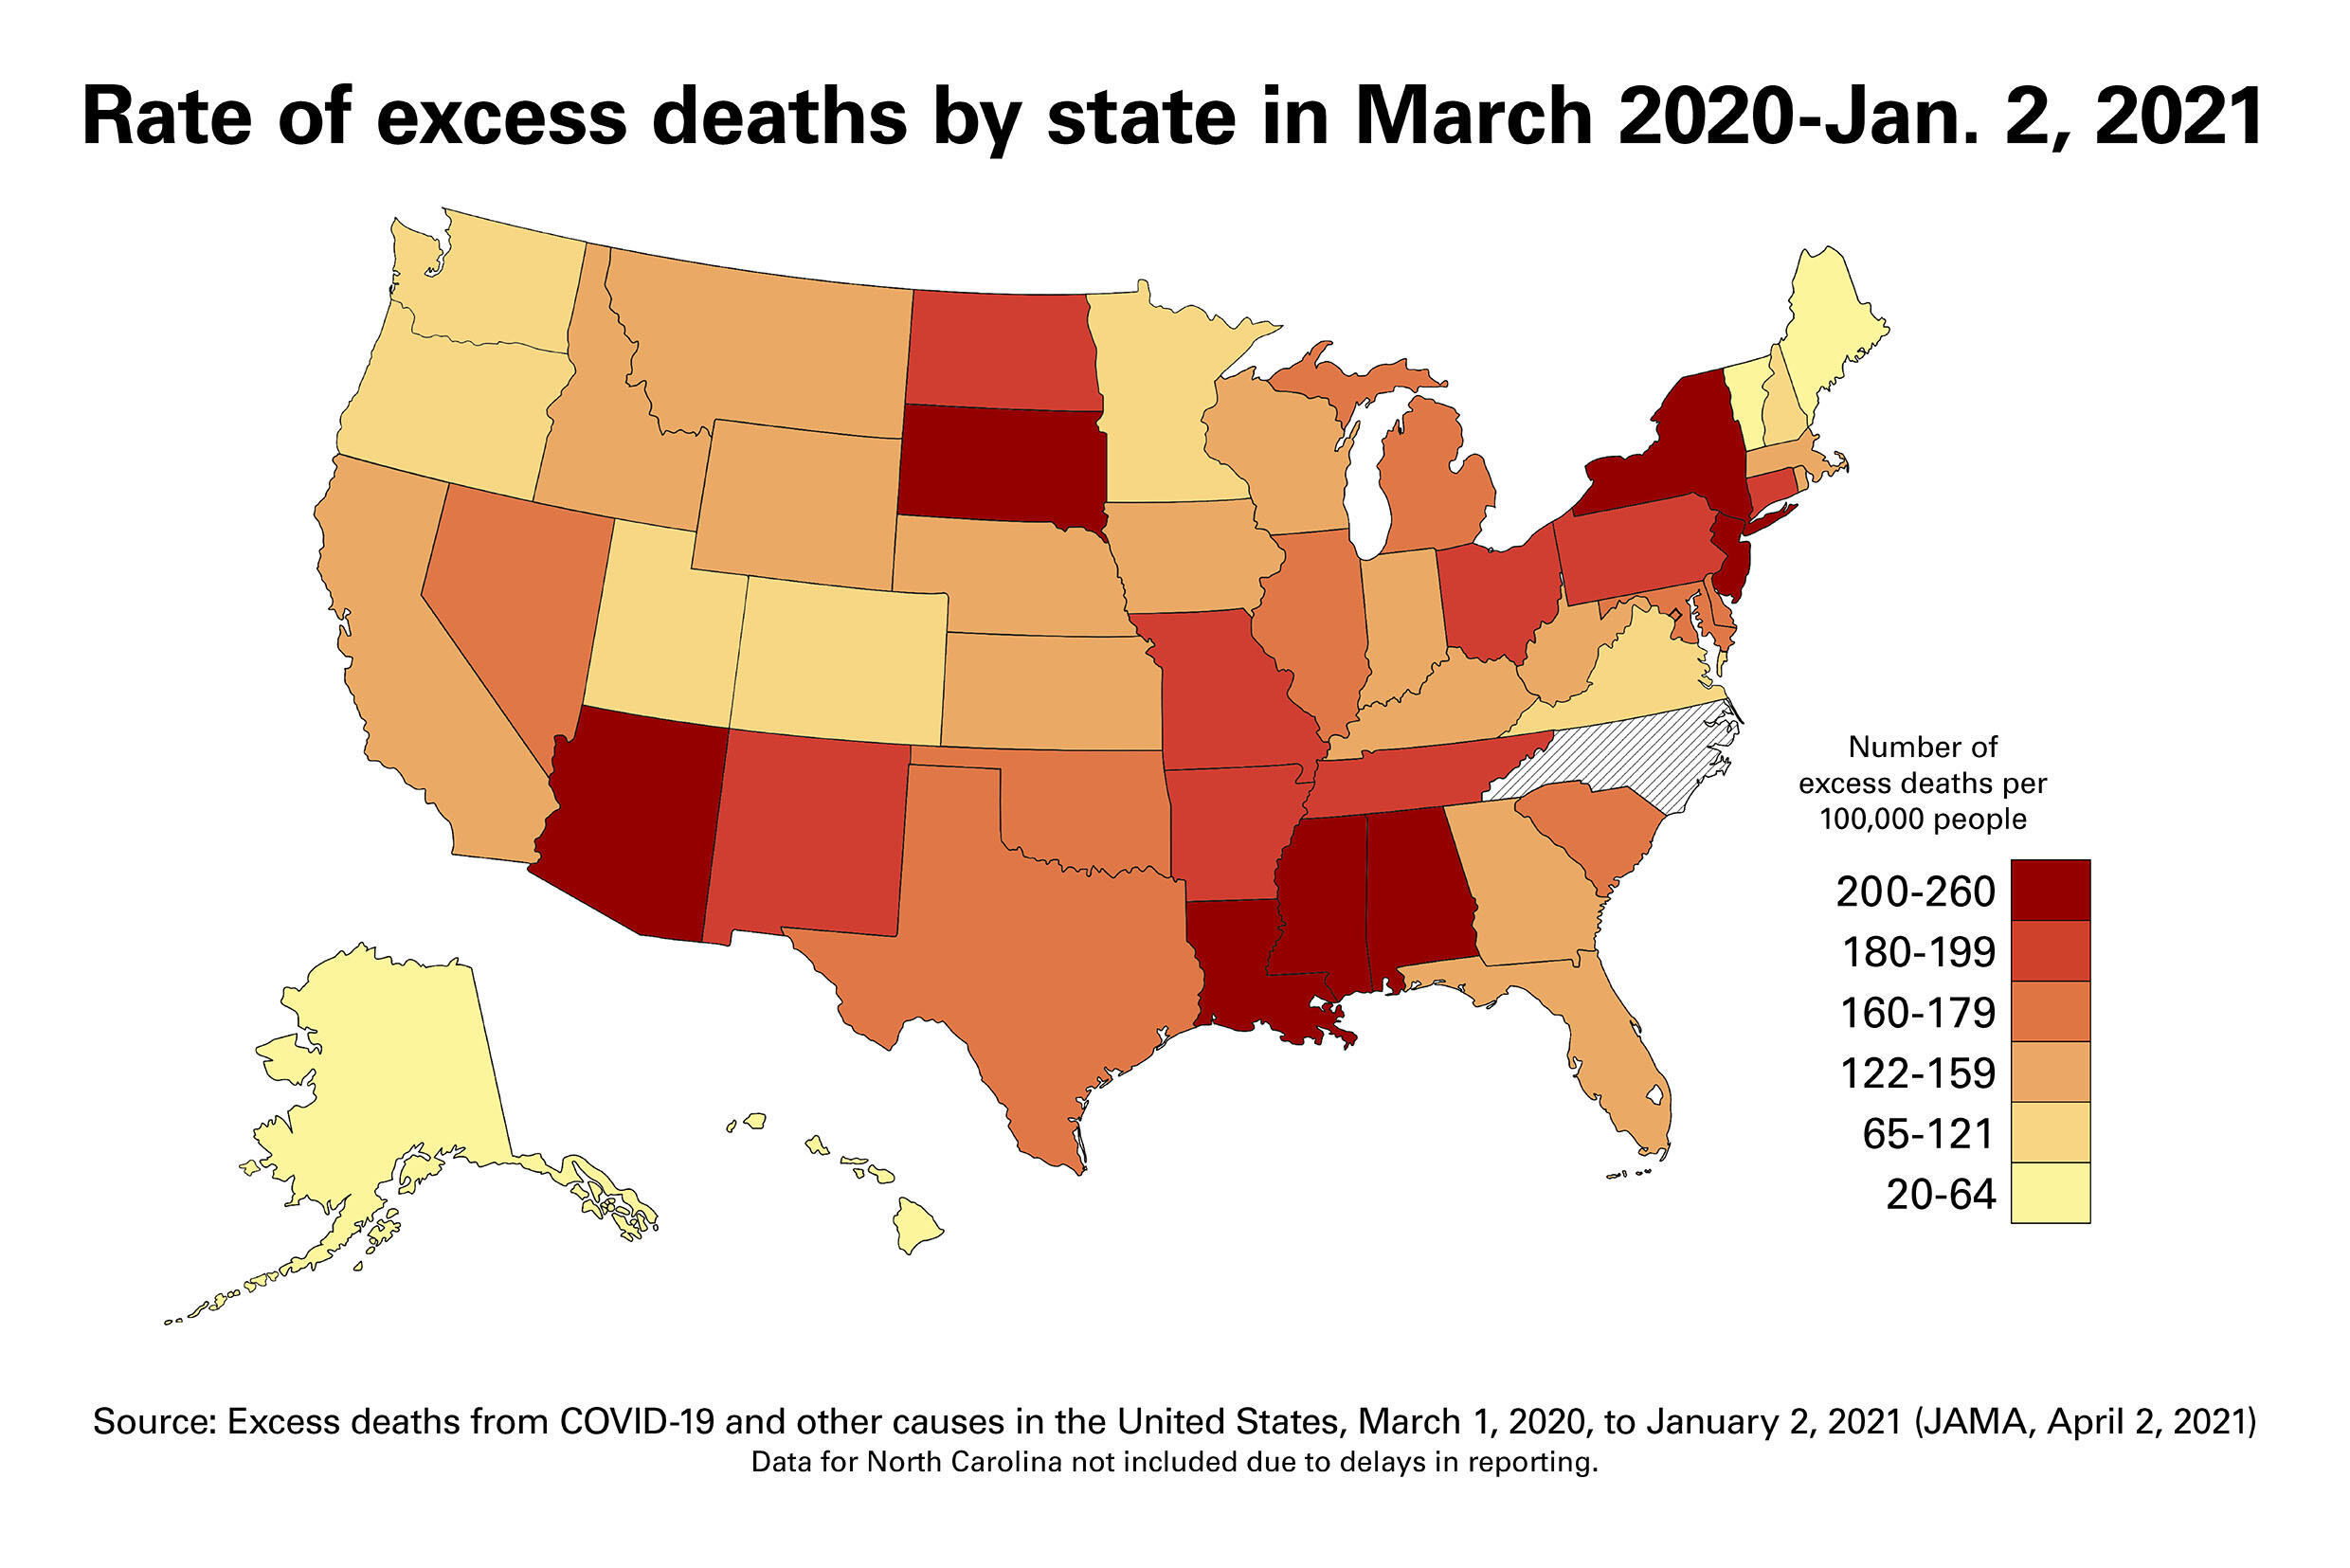 March 2020 to Jan 2021 Excess Deaths map: A 50-state analysis of excess deaths by a team of VCU researchers found Mississippi, New Jersey, New York, Arizona, Alabama, Louisiana, South Dakota, New Mexico, North Dakota and Ohio had the highest rates of excess deaths during the last 10 months of 2020, among other findings.